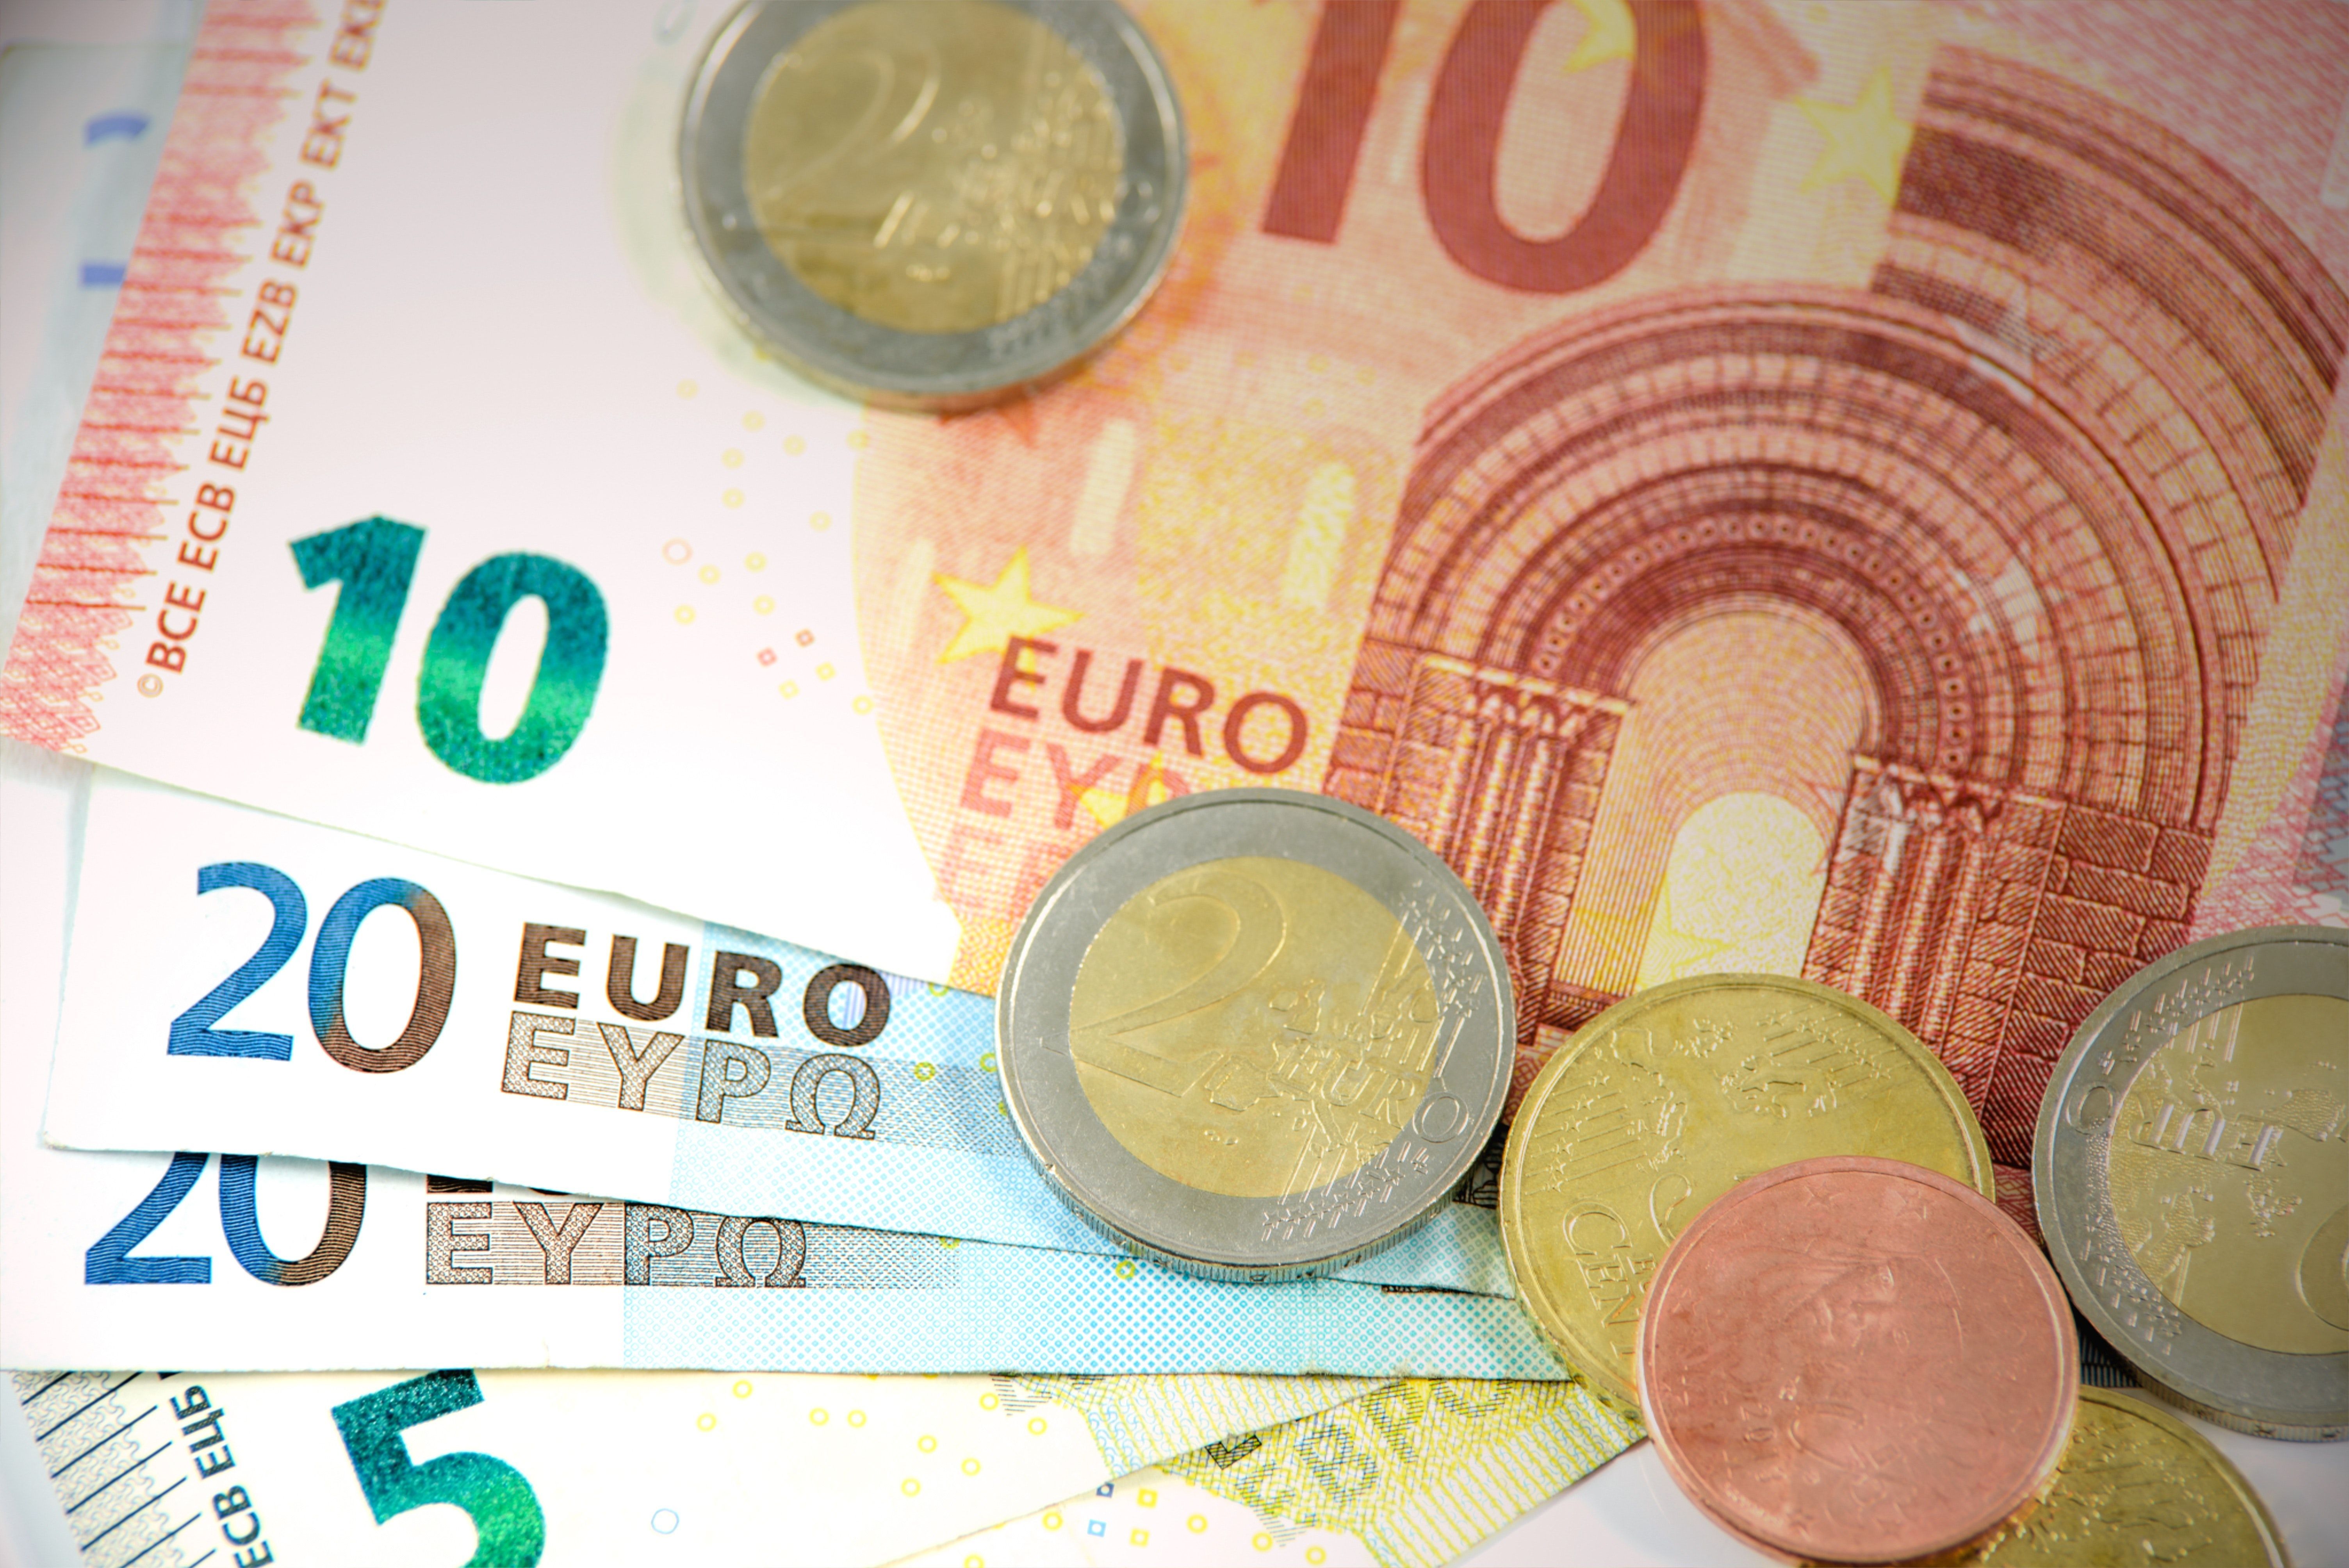 Euro today and Euro blue today: how much is it offered this Friday, March 1